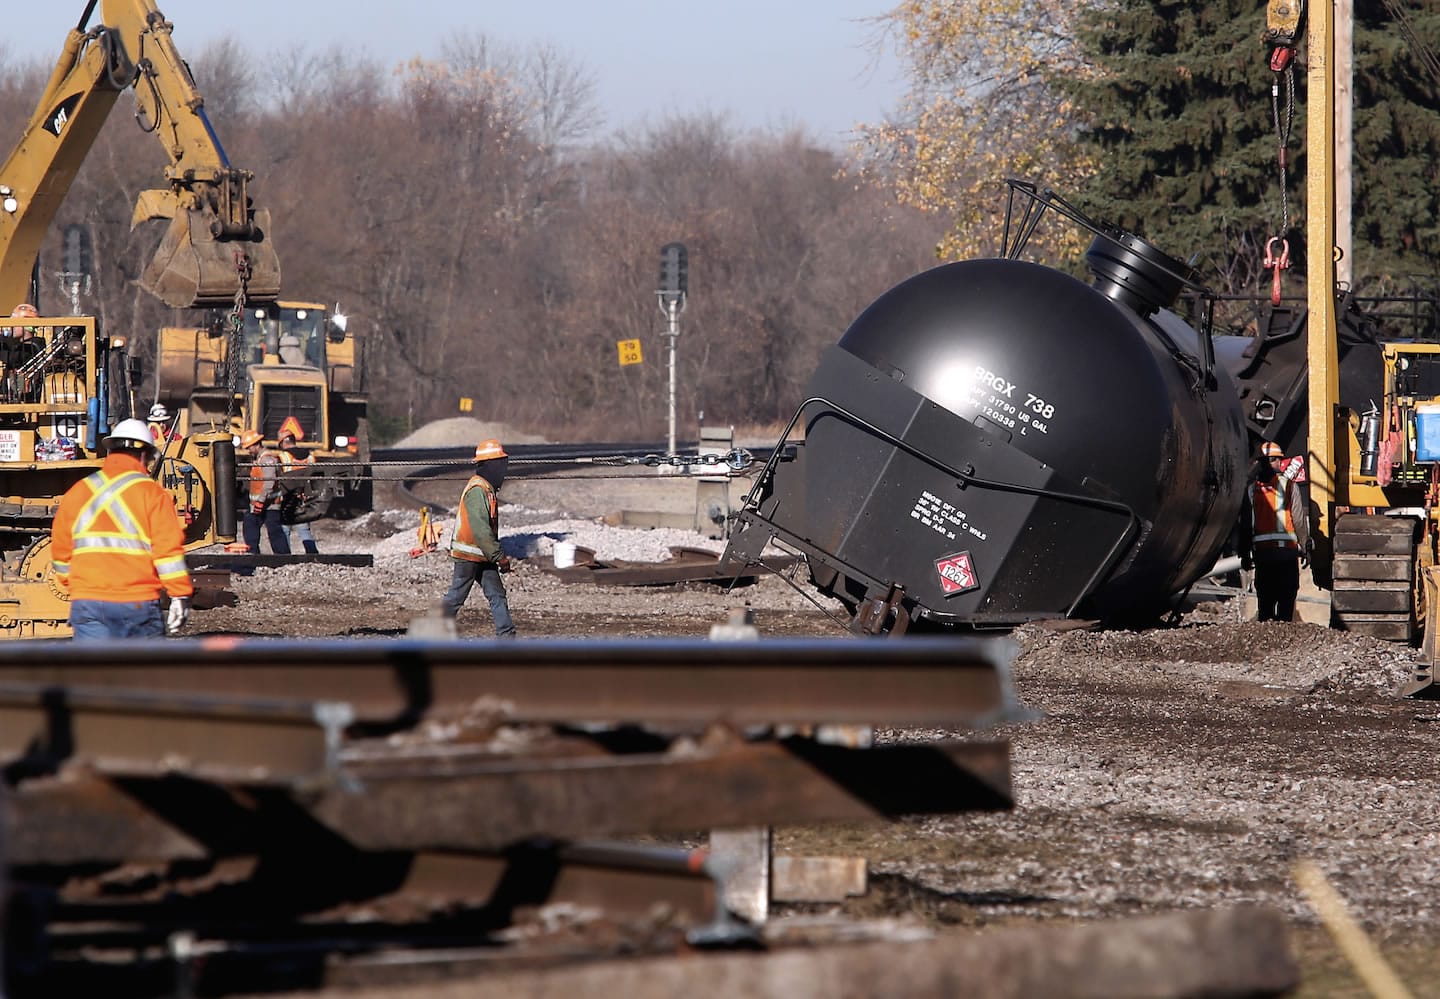 Workers tend to the scene of a train derailment in Watertown, Wis. Monday after a 13 cars of a Canadian Pacific train carrying crude oil overturned Sunday. One of the cars was punctured, spilling less than 1,000 gallons of oil. Thirteen of 110 cars derailed in Watertown Sunday afternoon, the second derailment in Wisconsin in as many days.